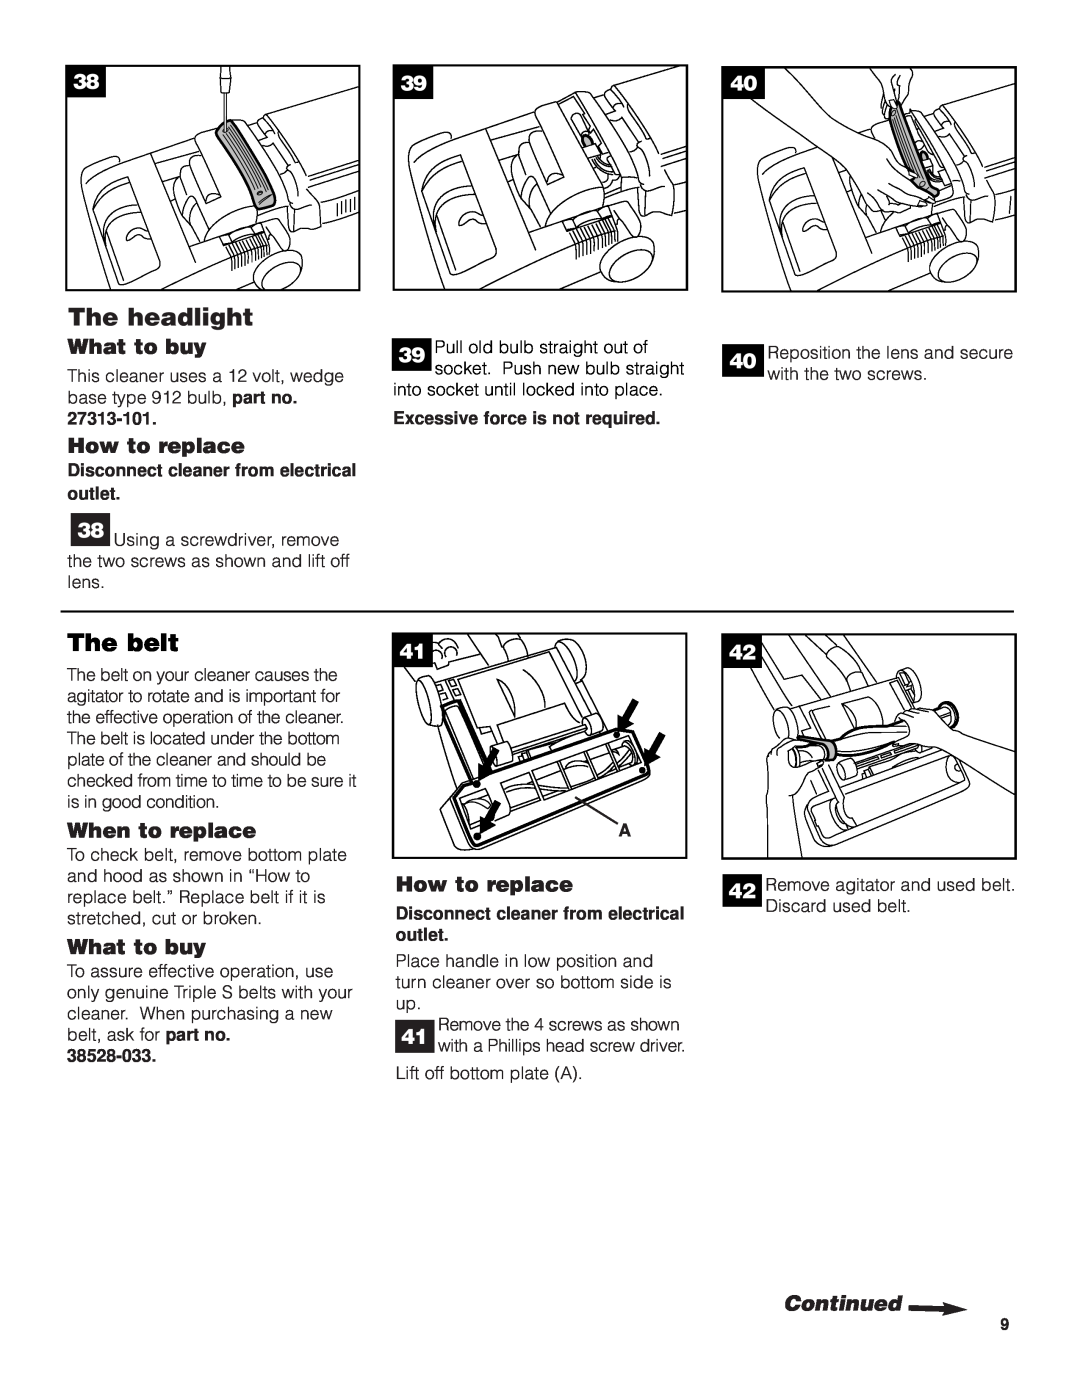 SSS AF9 manual The headlight, The belt, How to replace, Continued, What to buy, When to replace 